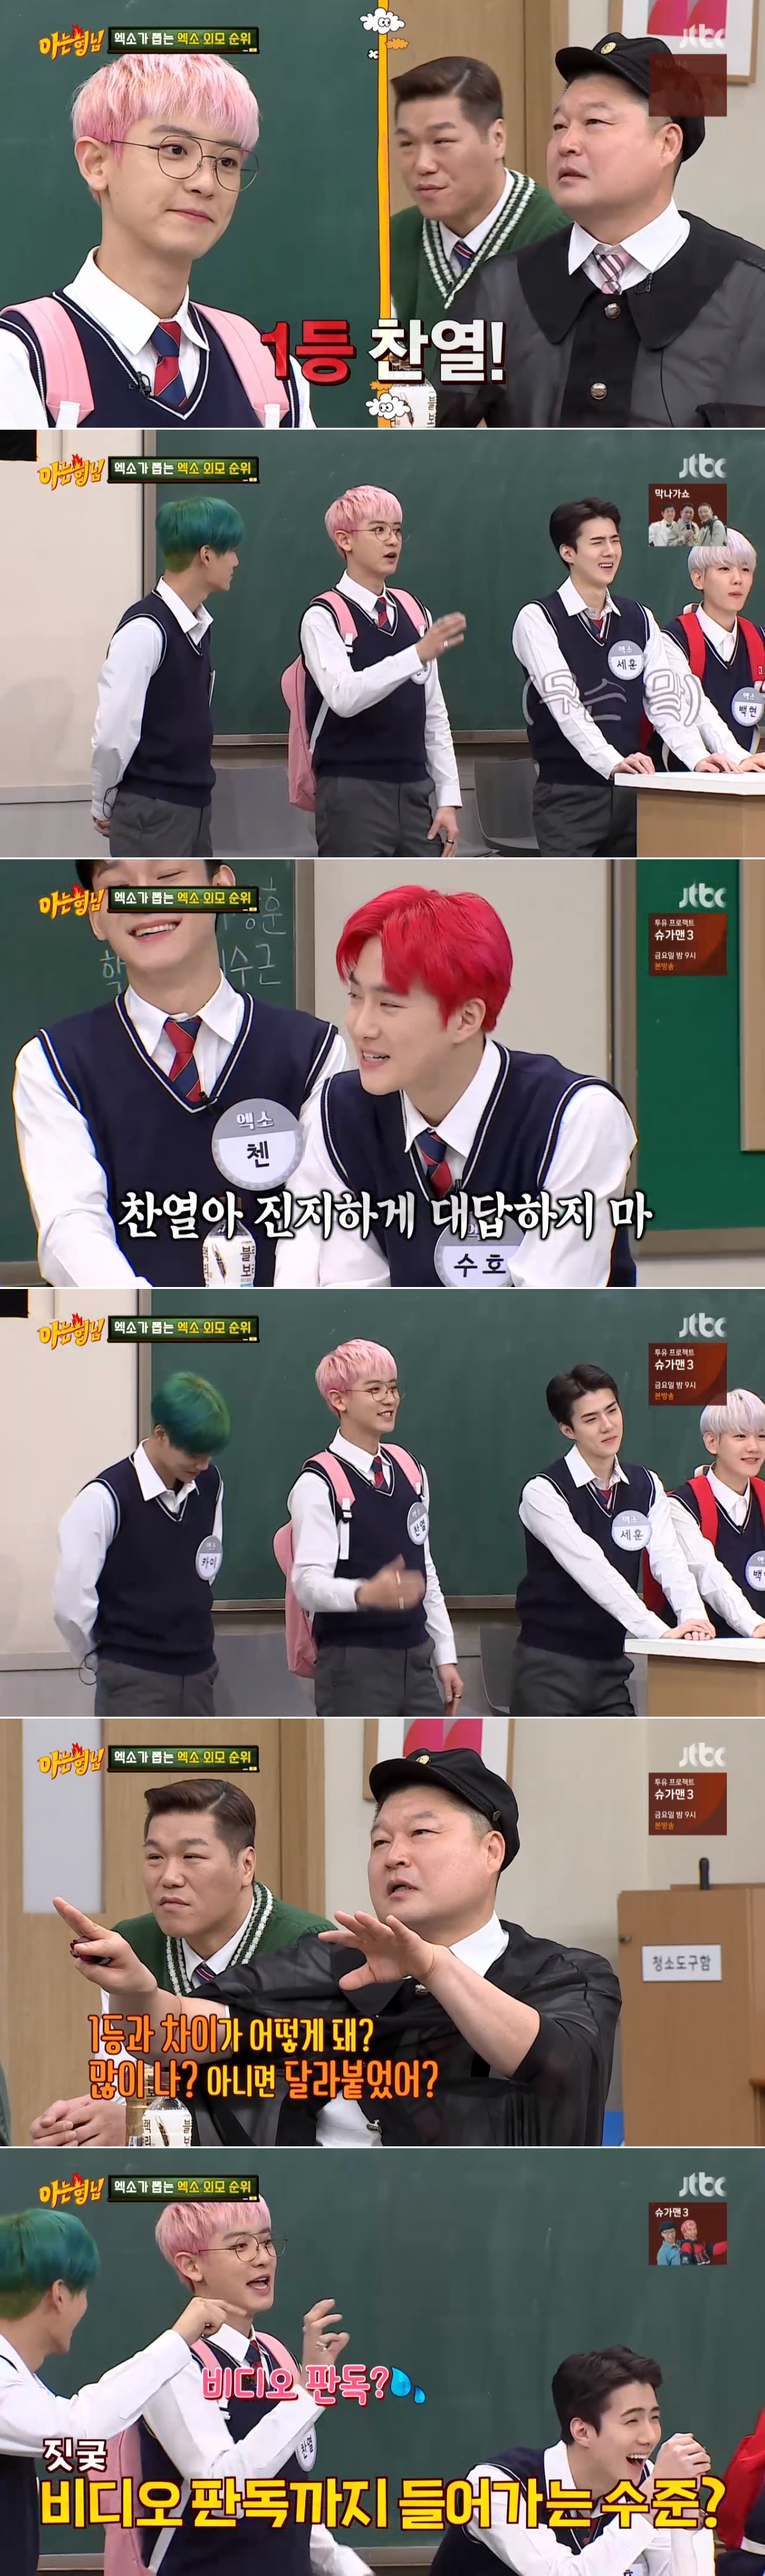 On JTBCs Knowing Bros broadcast on the 7th, EXO appeared as a transfer student and showed off his duties. On this day, EXO was accompanied by six people except Dio and Siu Min.On this day, Kang Ho-dong asked Chanyeol, Is he the most handsome person to think about himself? Chanyeol expressed confidence, saying, Thats the way it is.When the members of Knowing Bros asked me to disclose their appearance rankings, Chanyeol said, I am the first, he said. Sehun is the second and Suho is the third.Suho, who was hot in this, spoke about his EXO appearance ranking.Suho said, I will not say Sehun in second place, Kai in third place, Baek Hyun in fourth place, Chen in fifth place, and 6th place.